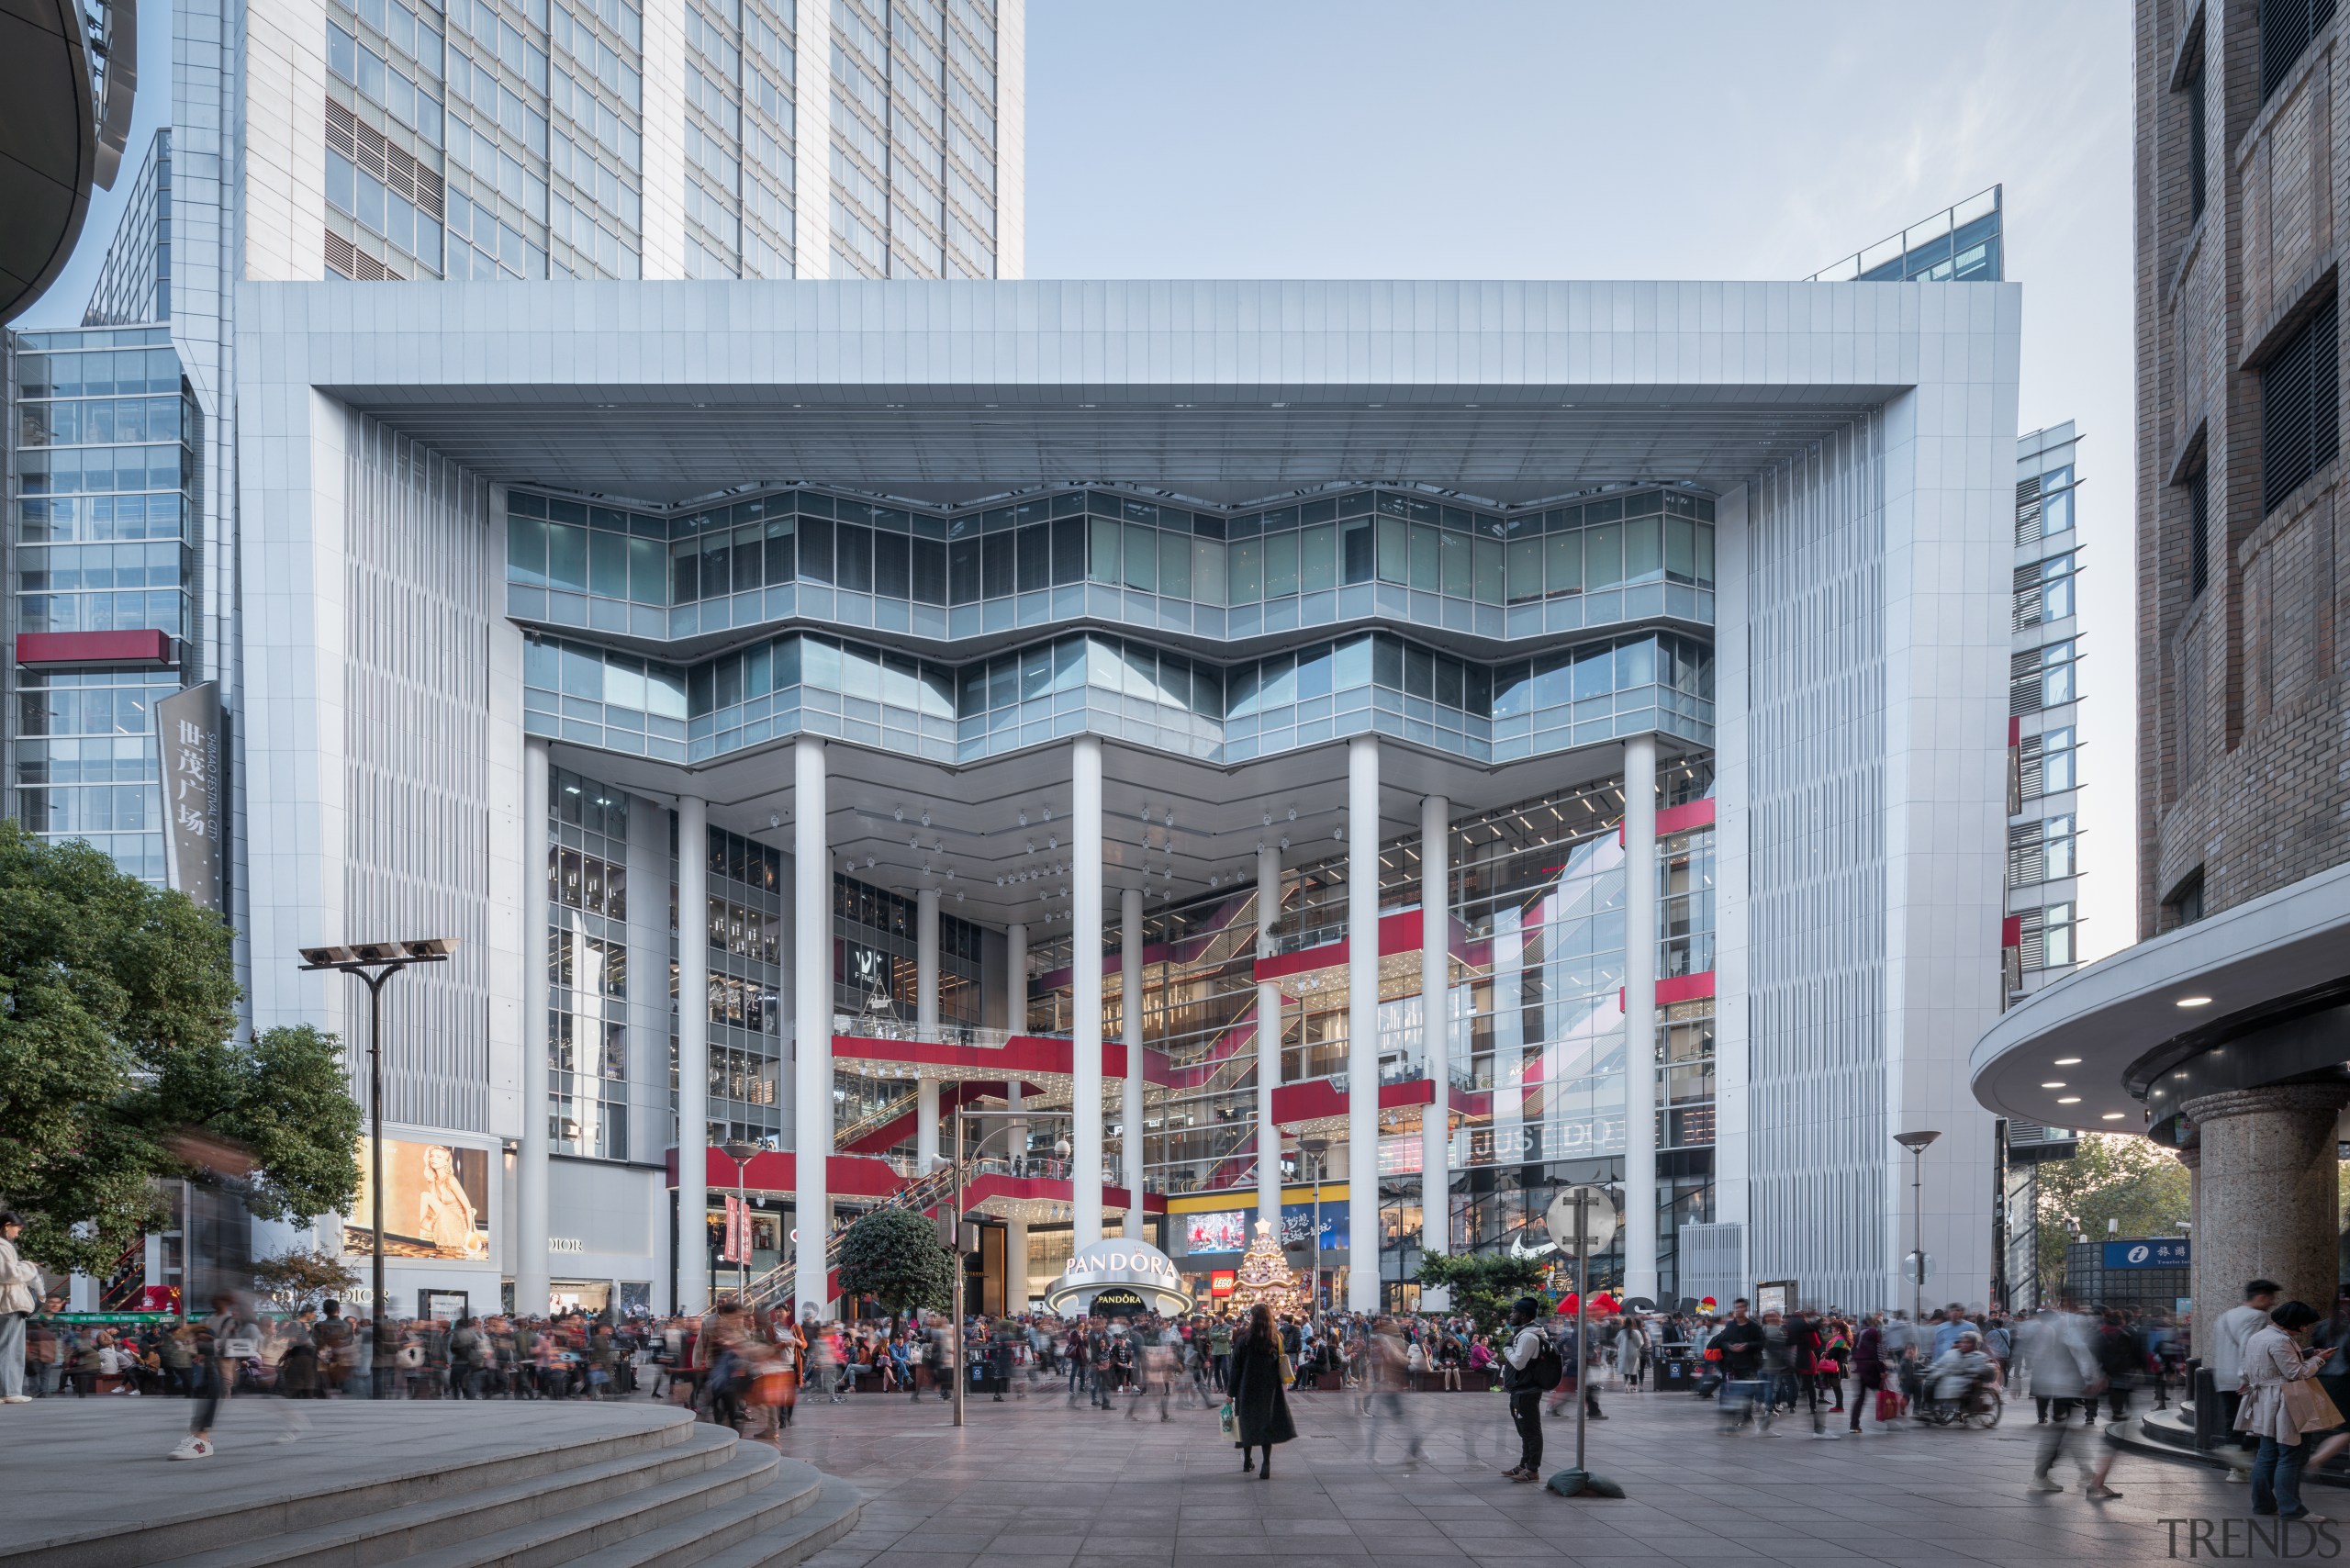 When redesigning Shimao Festival City mall in Shanghai, architecture, building, city, commercial building, Shimao Festival City, mall, Koskaistuios